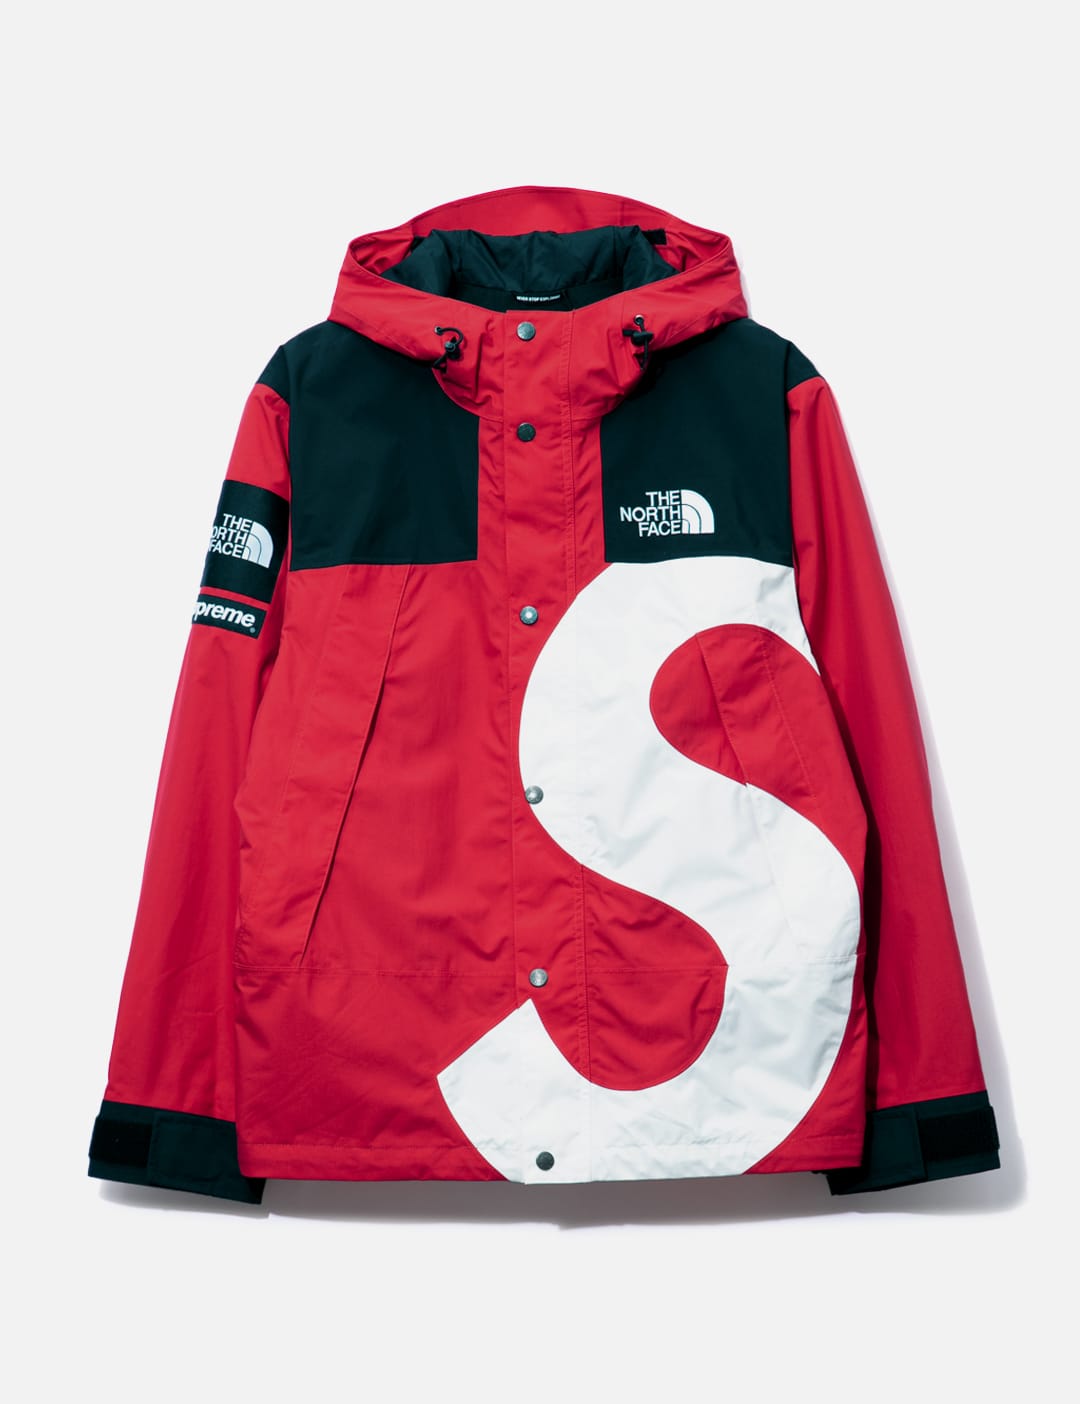 Supreme x The North Face FW20 Mountain Jacket